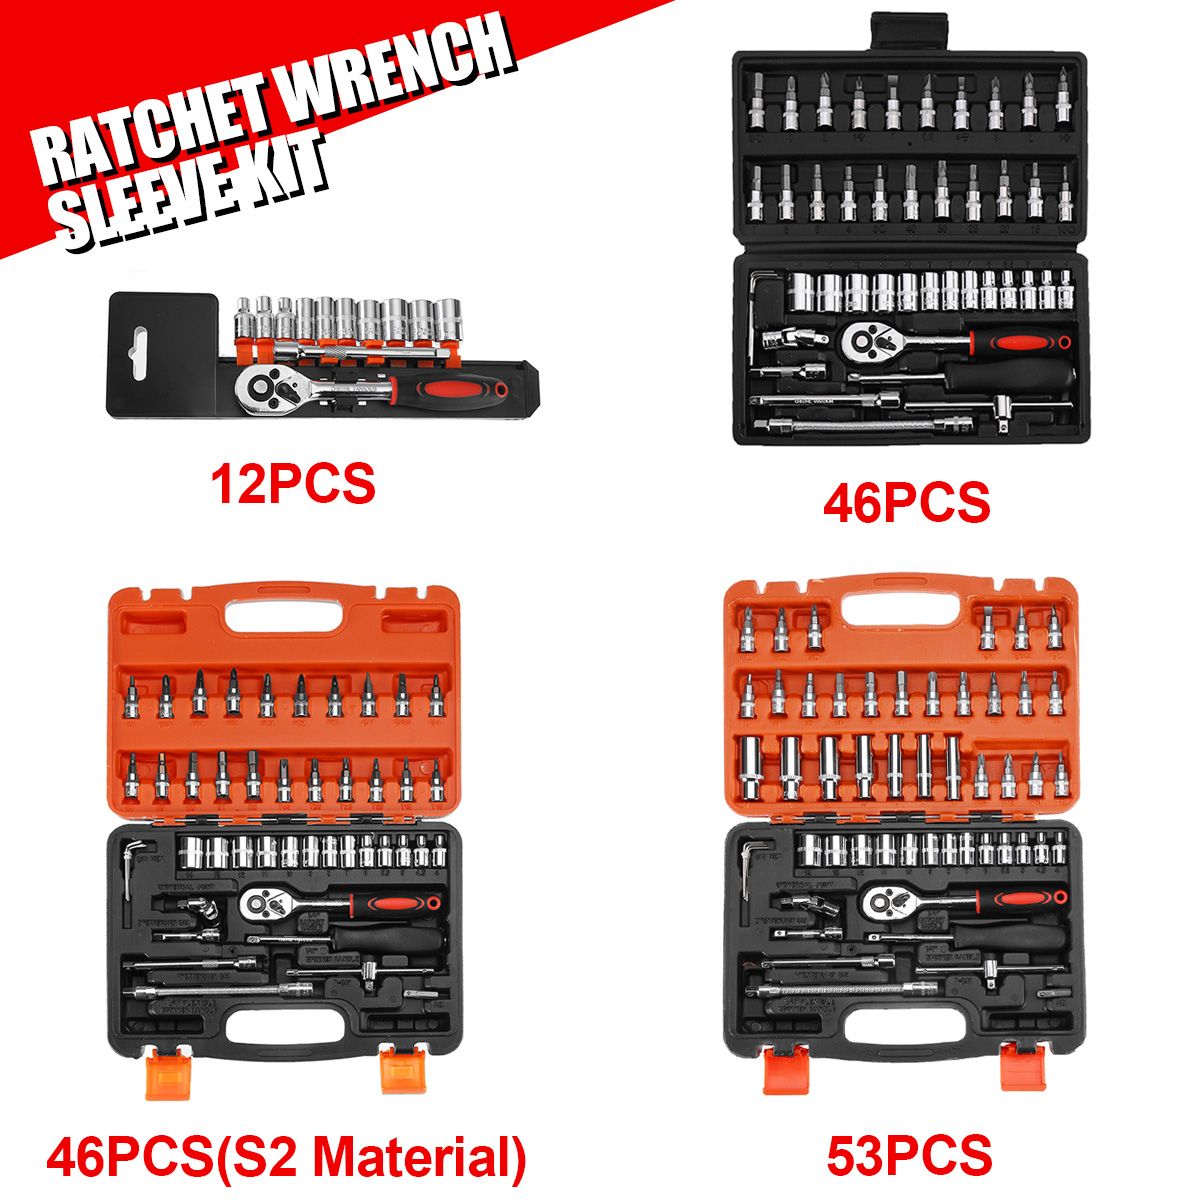 Ratchet-Wrench-Sleeve-Kit-Car-Boat-Motorcycle-Bicycle-Hardware-Repair-Tool-124653Pcs-1658195